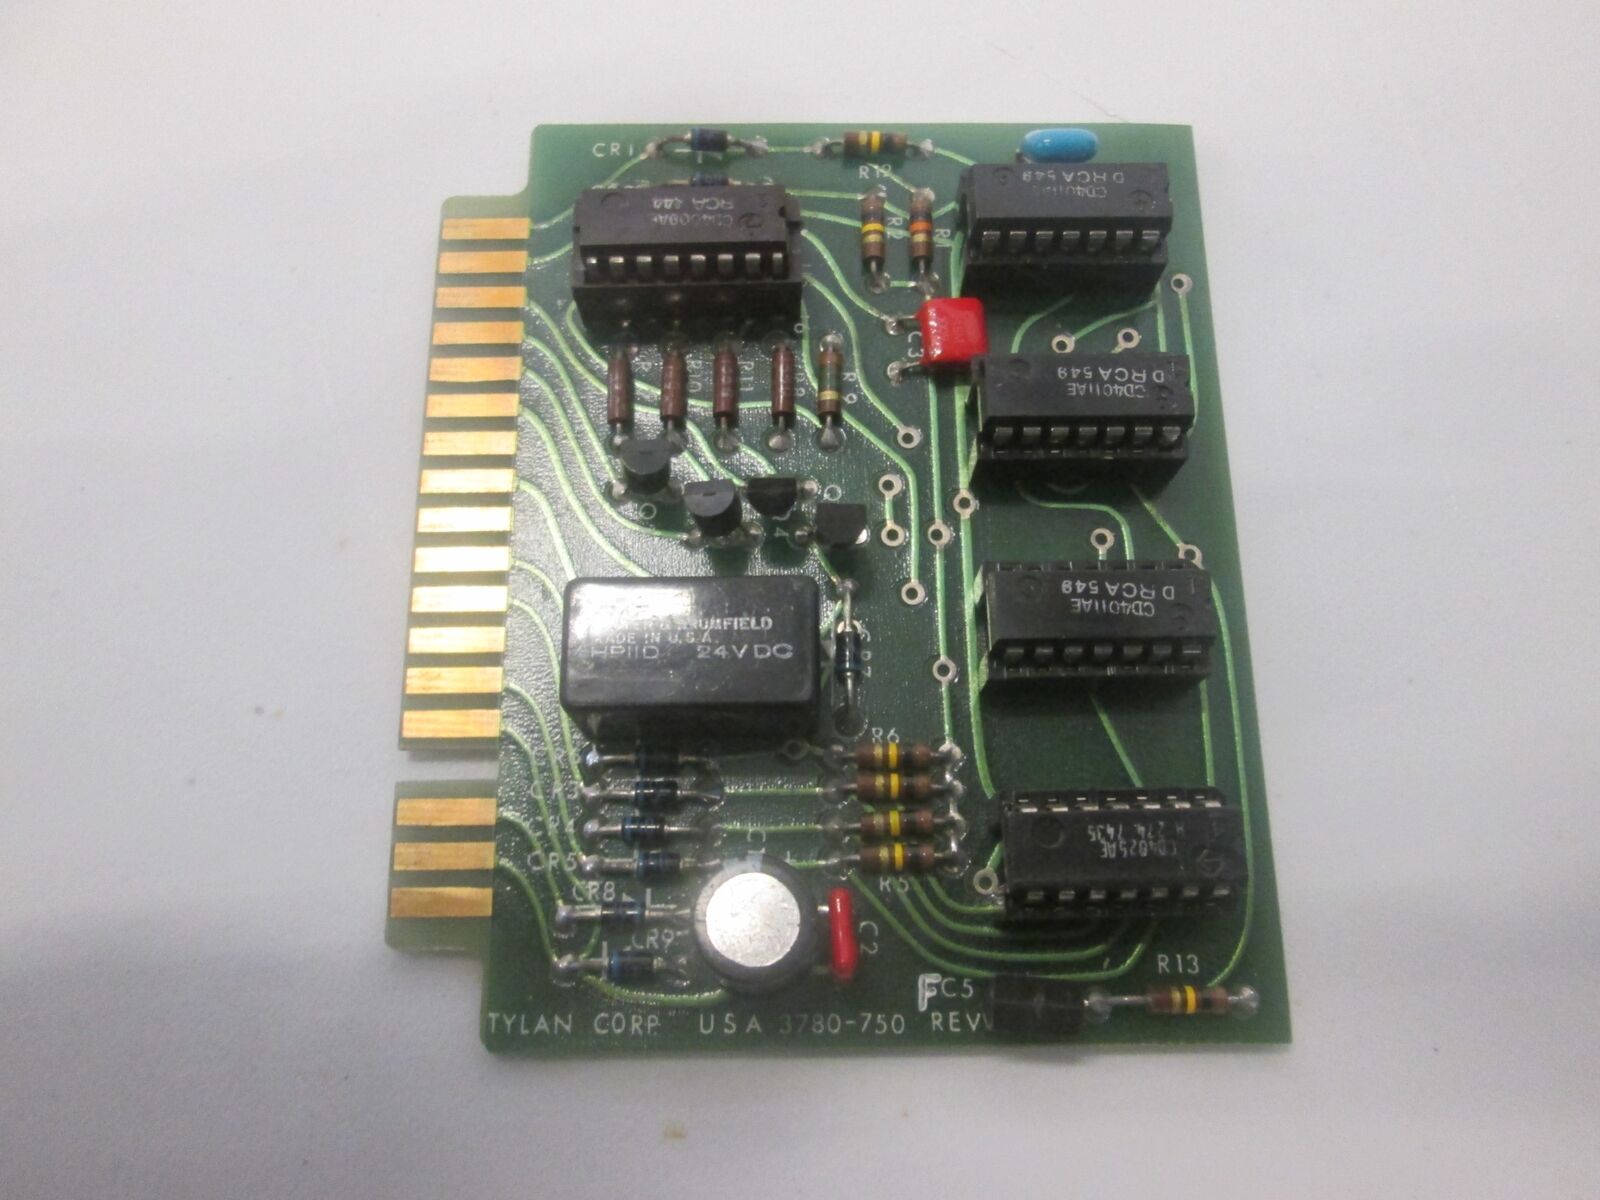 Tylan Corp, 3780-750, PCB Assy, Used